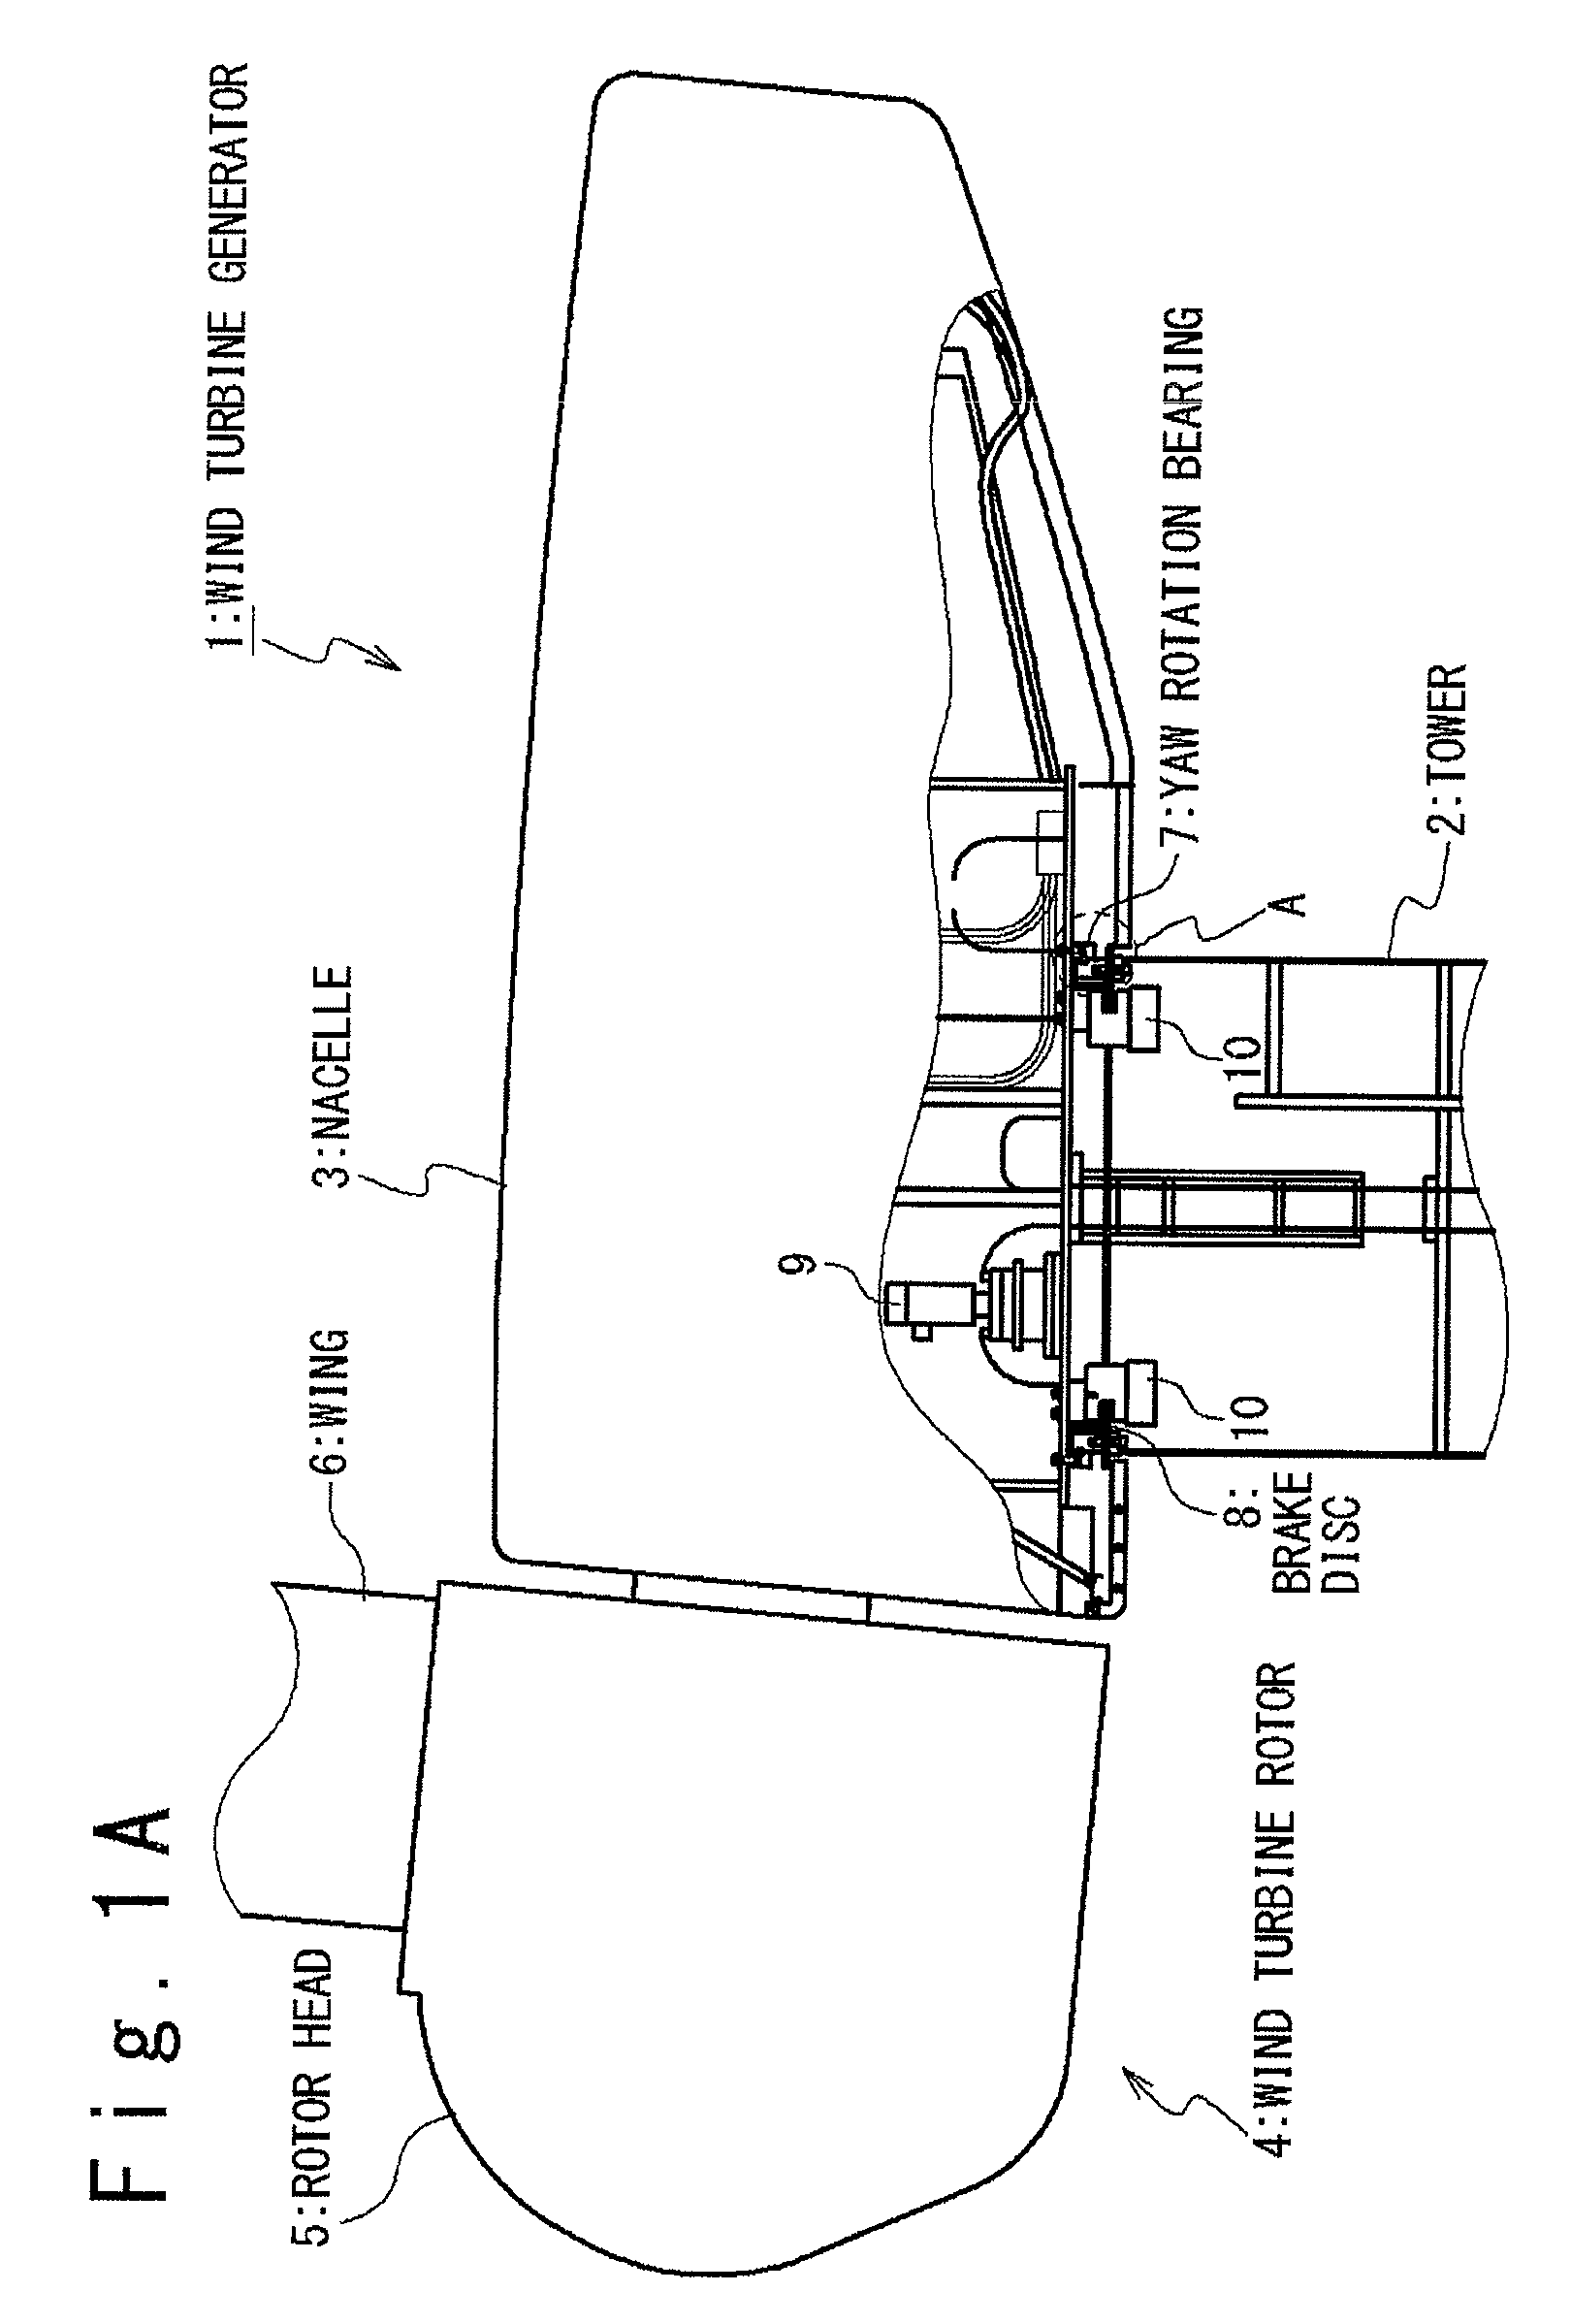 Method of lifting nacelle, nacelle lifting mechanism, tower, and wind turbine generator